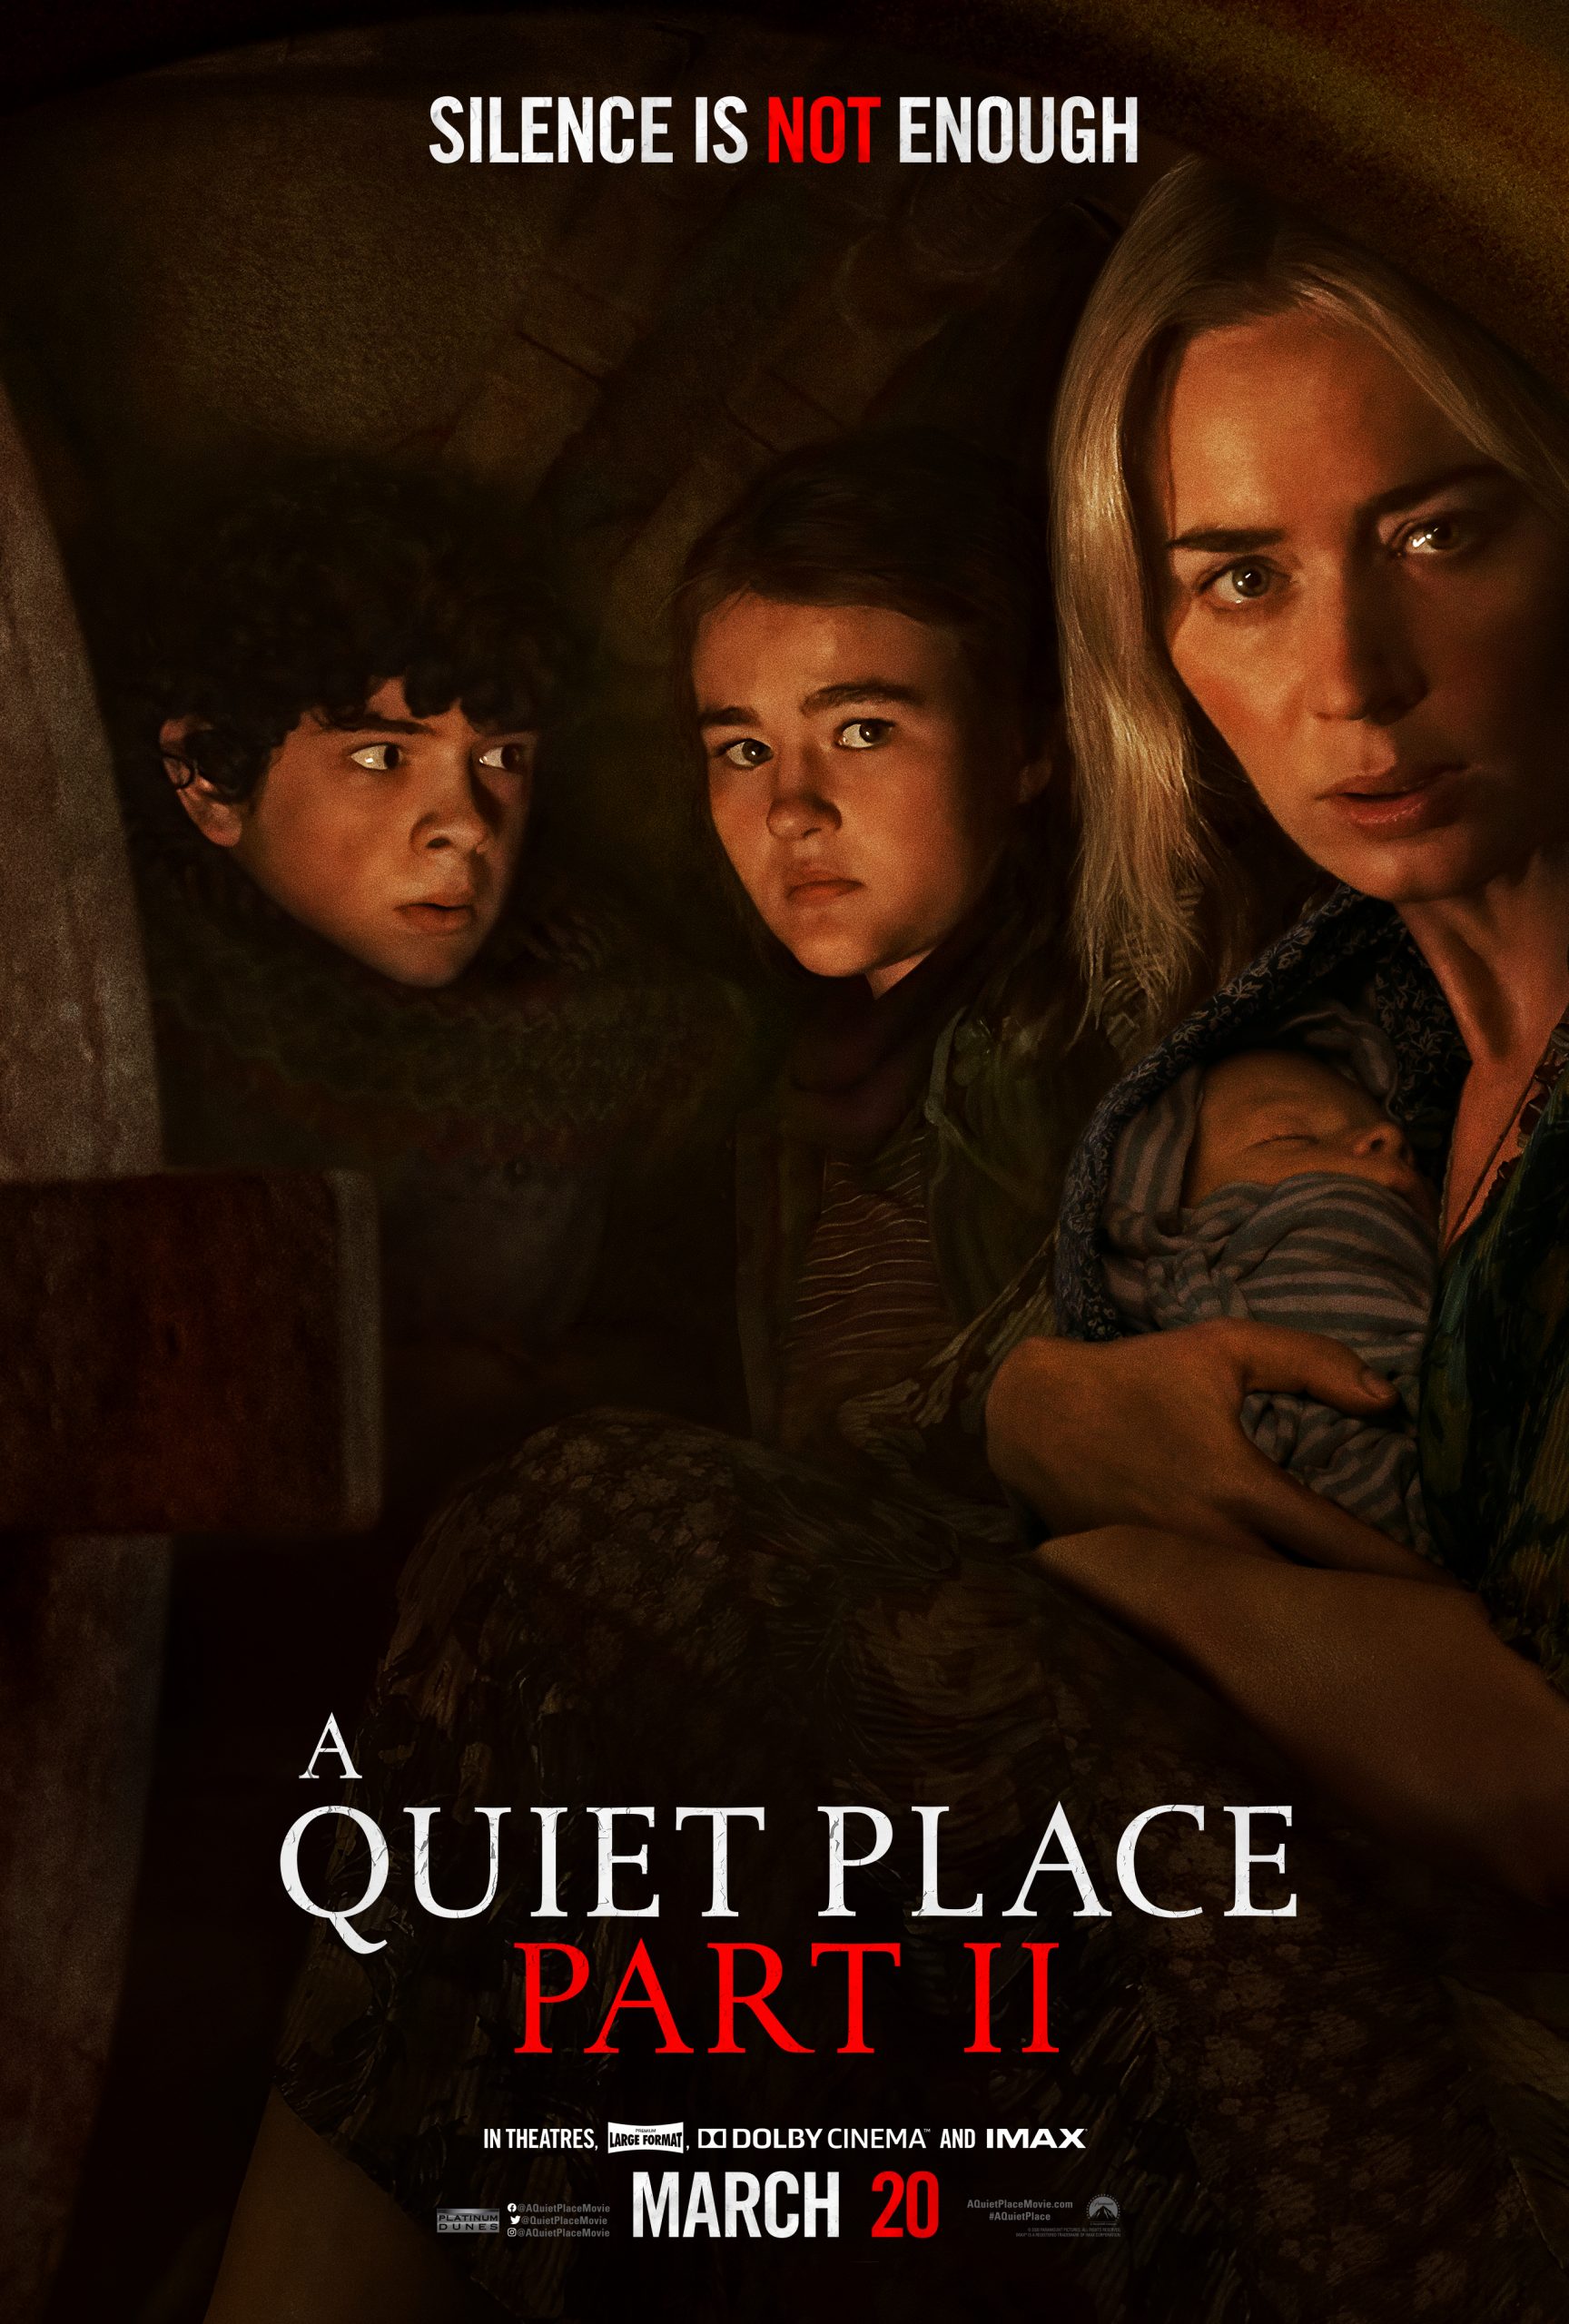 New Movie A Quiet Place Ii Starring Emily Blunt - Talking With Tami